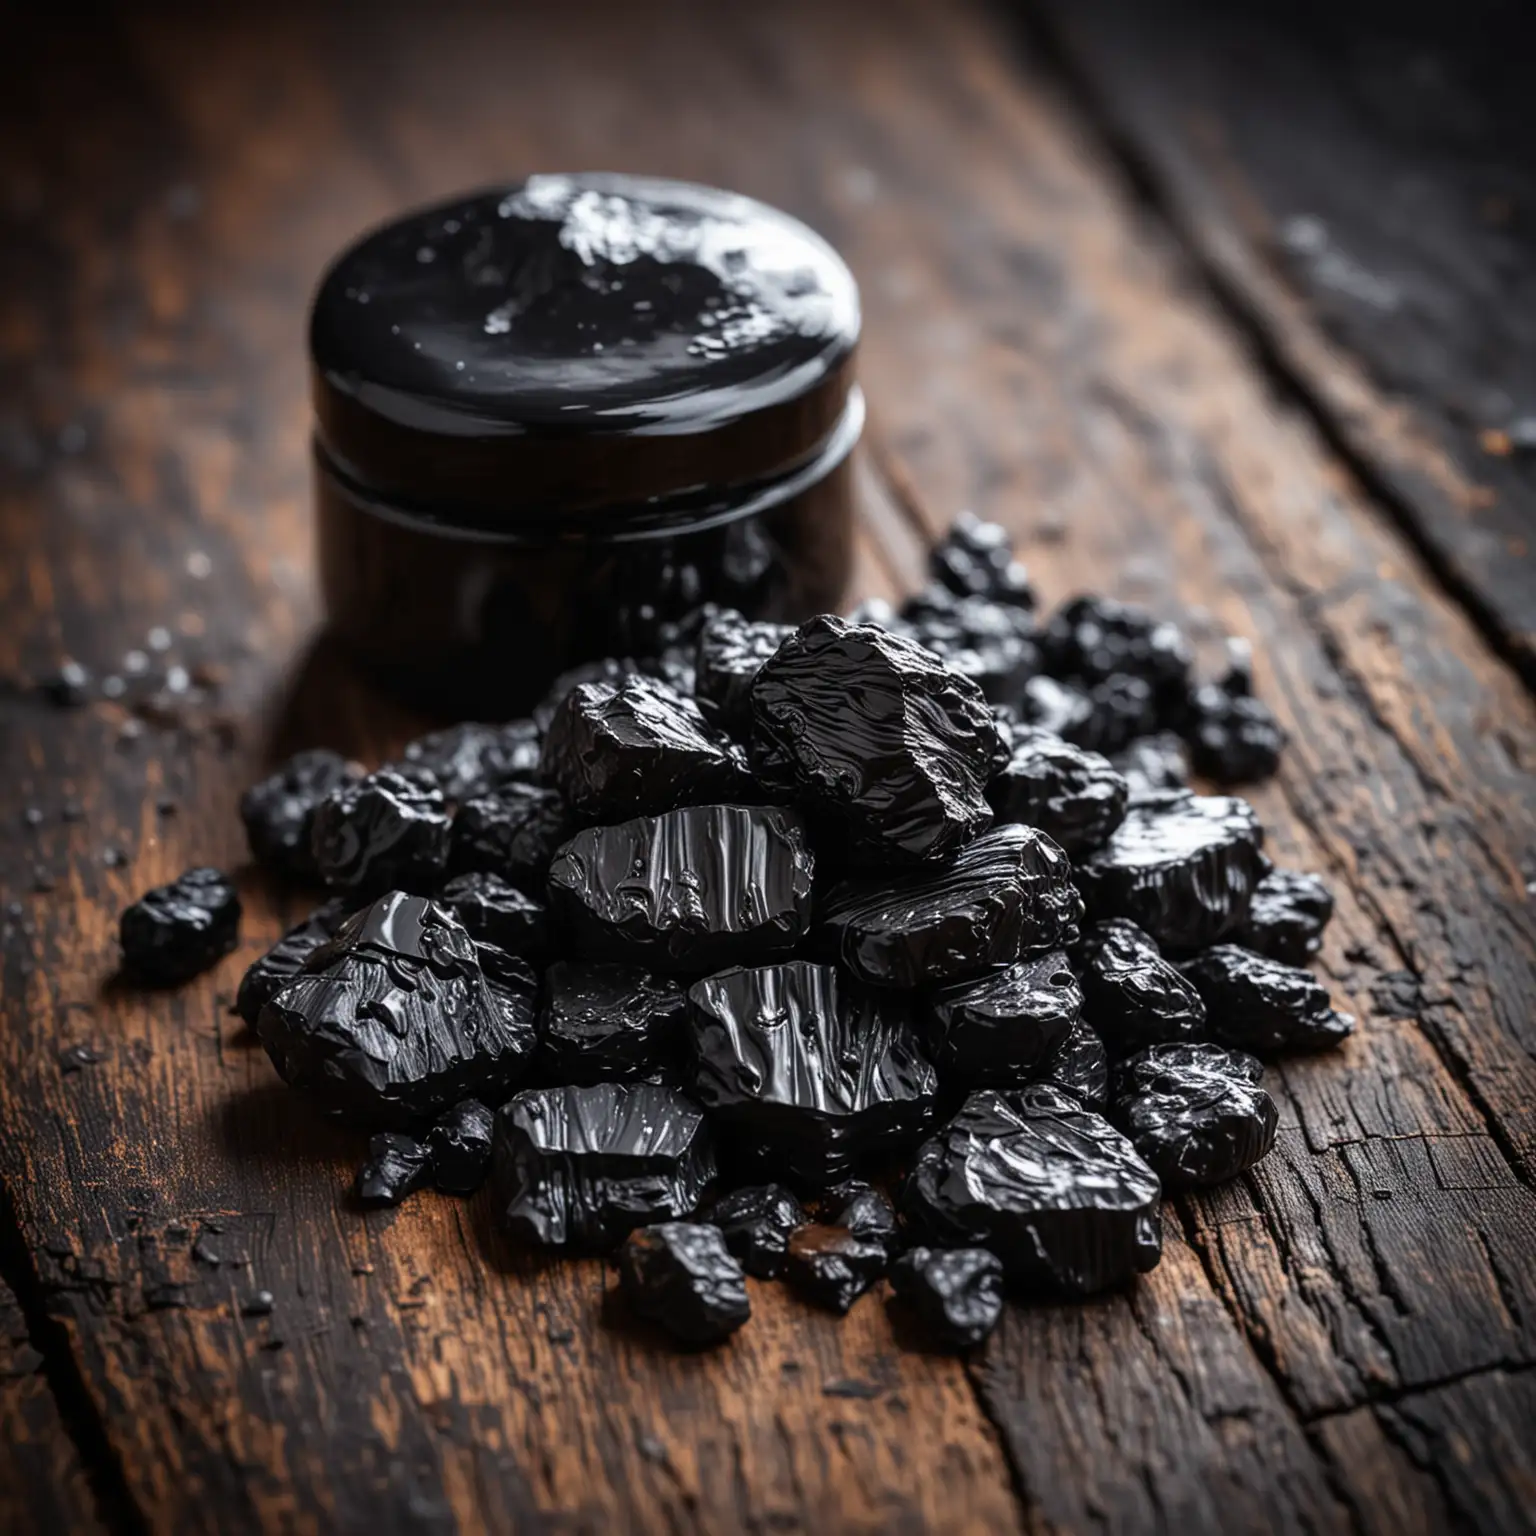 Shilajit in rock and resin form on dark wooden table with selective focus